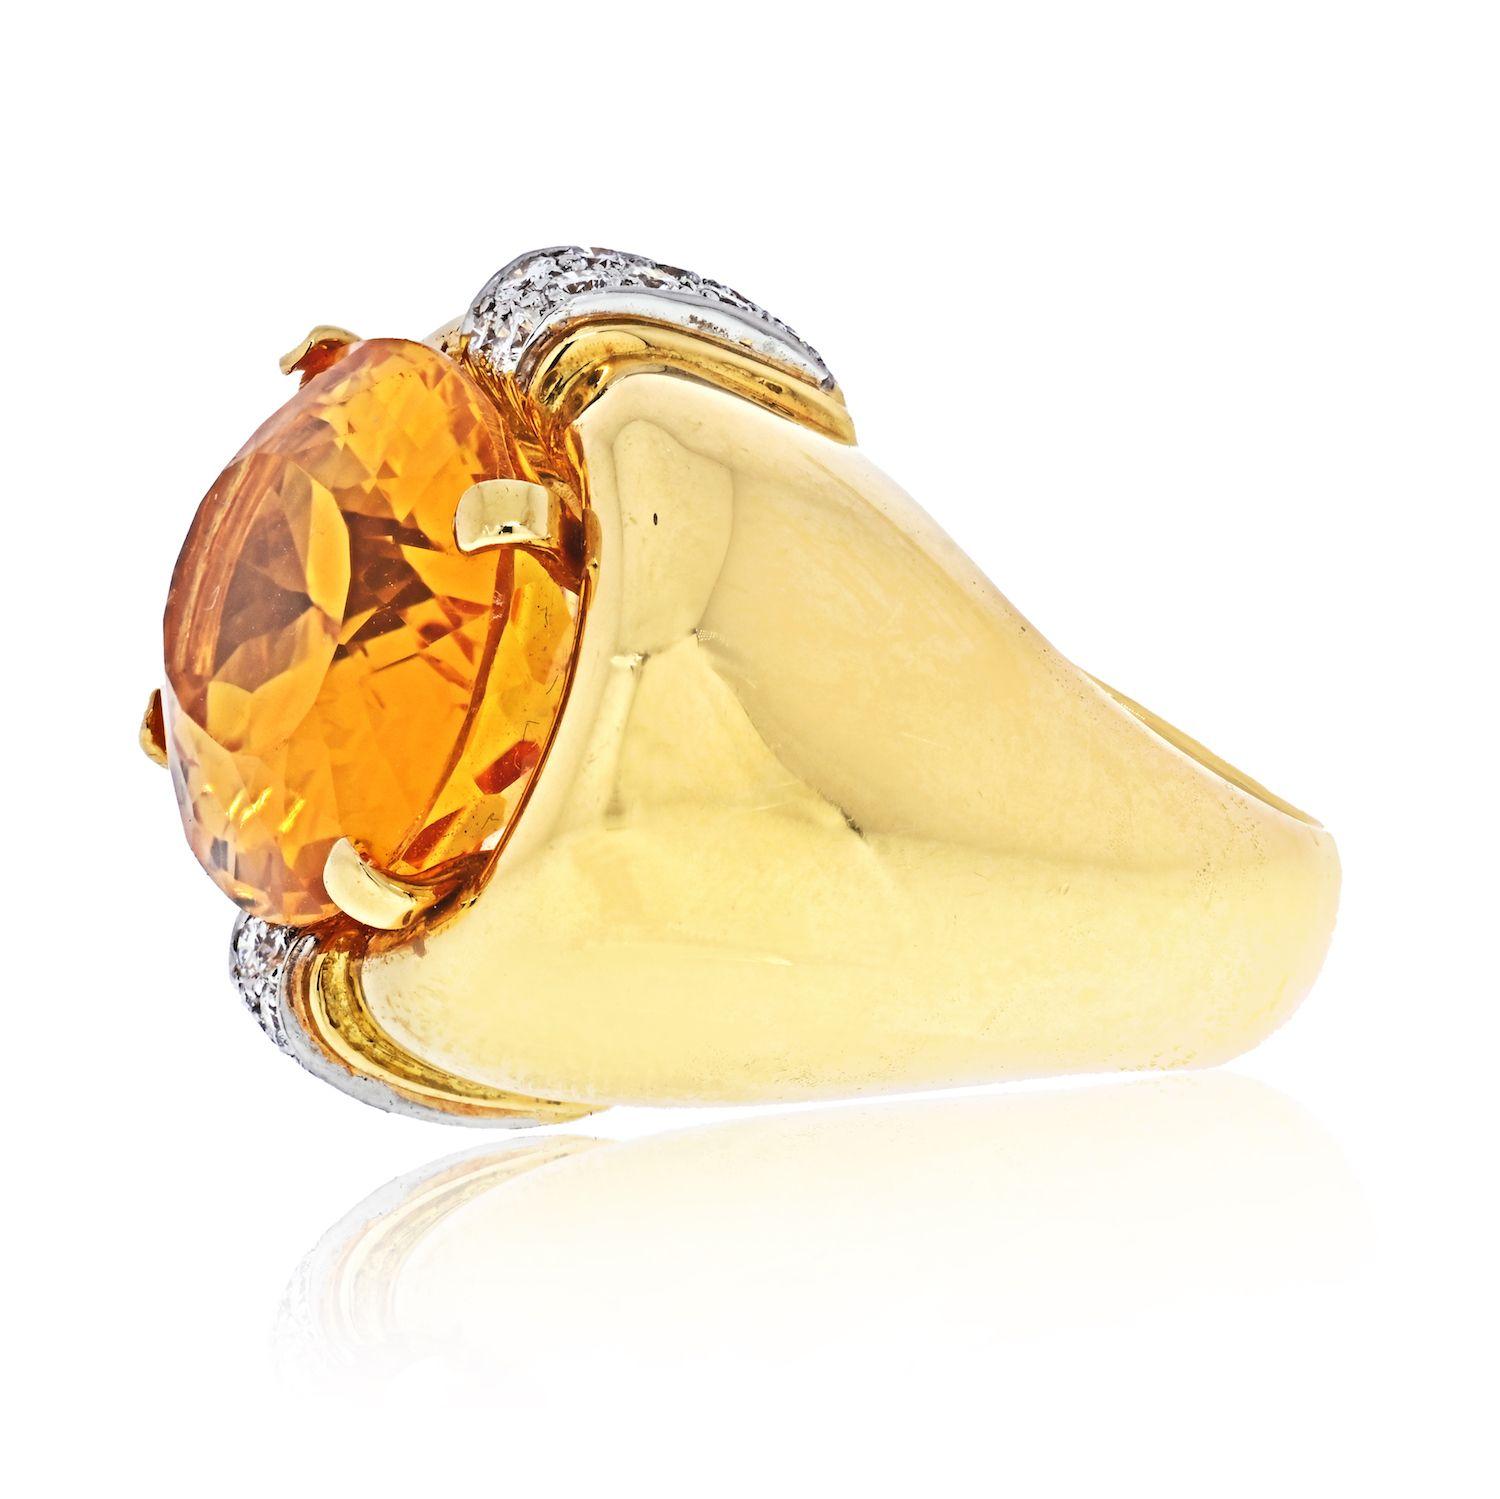 David Webb Platinum & 18K Yellow Gold Oval Orange Citrine And Diamond Ring.
Set with an oval-shaped citrine weighing approximately 17.95cts and accented by round diamonds weighing approximately 0.15ct, mounted in 18k gold and platinum, size 5 1/2,